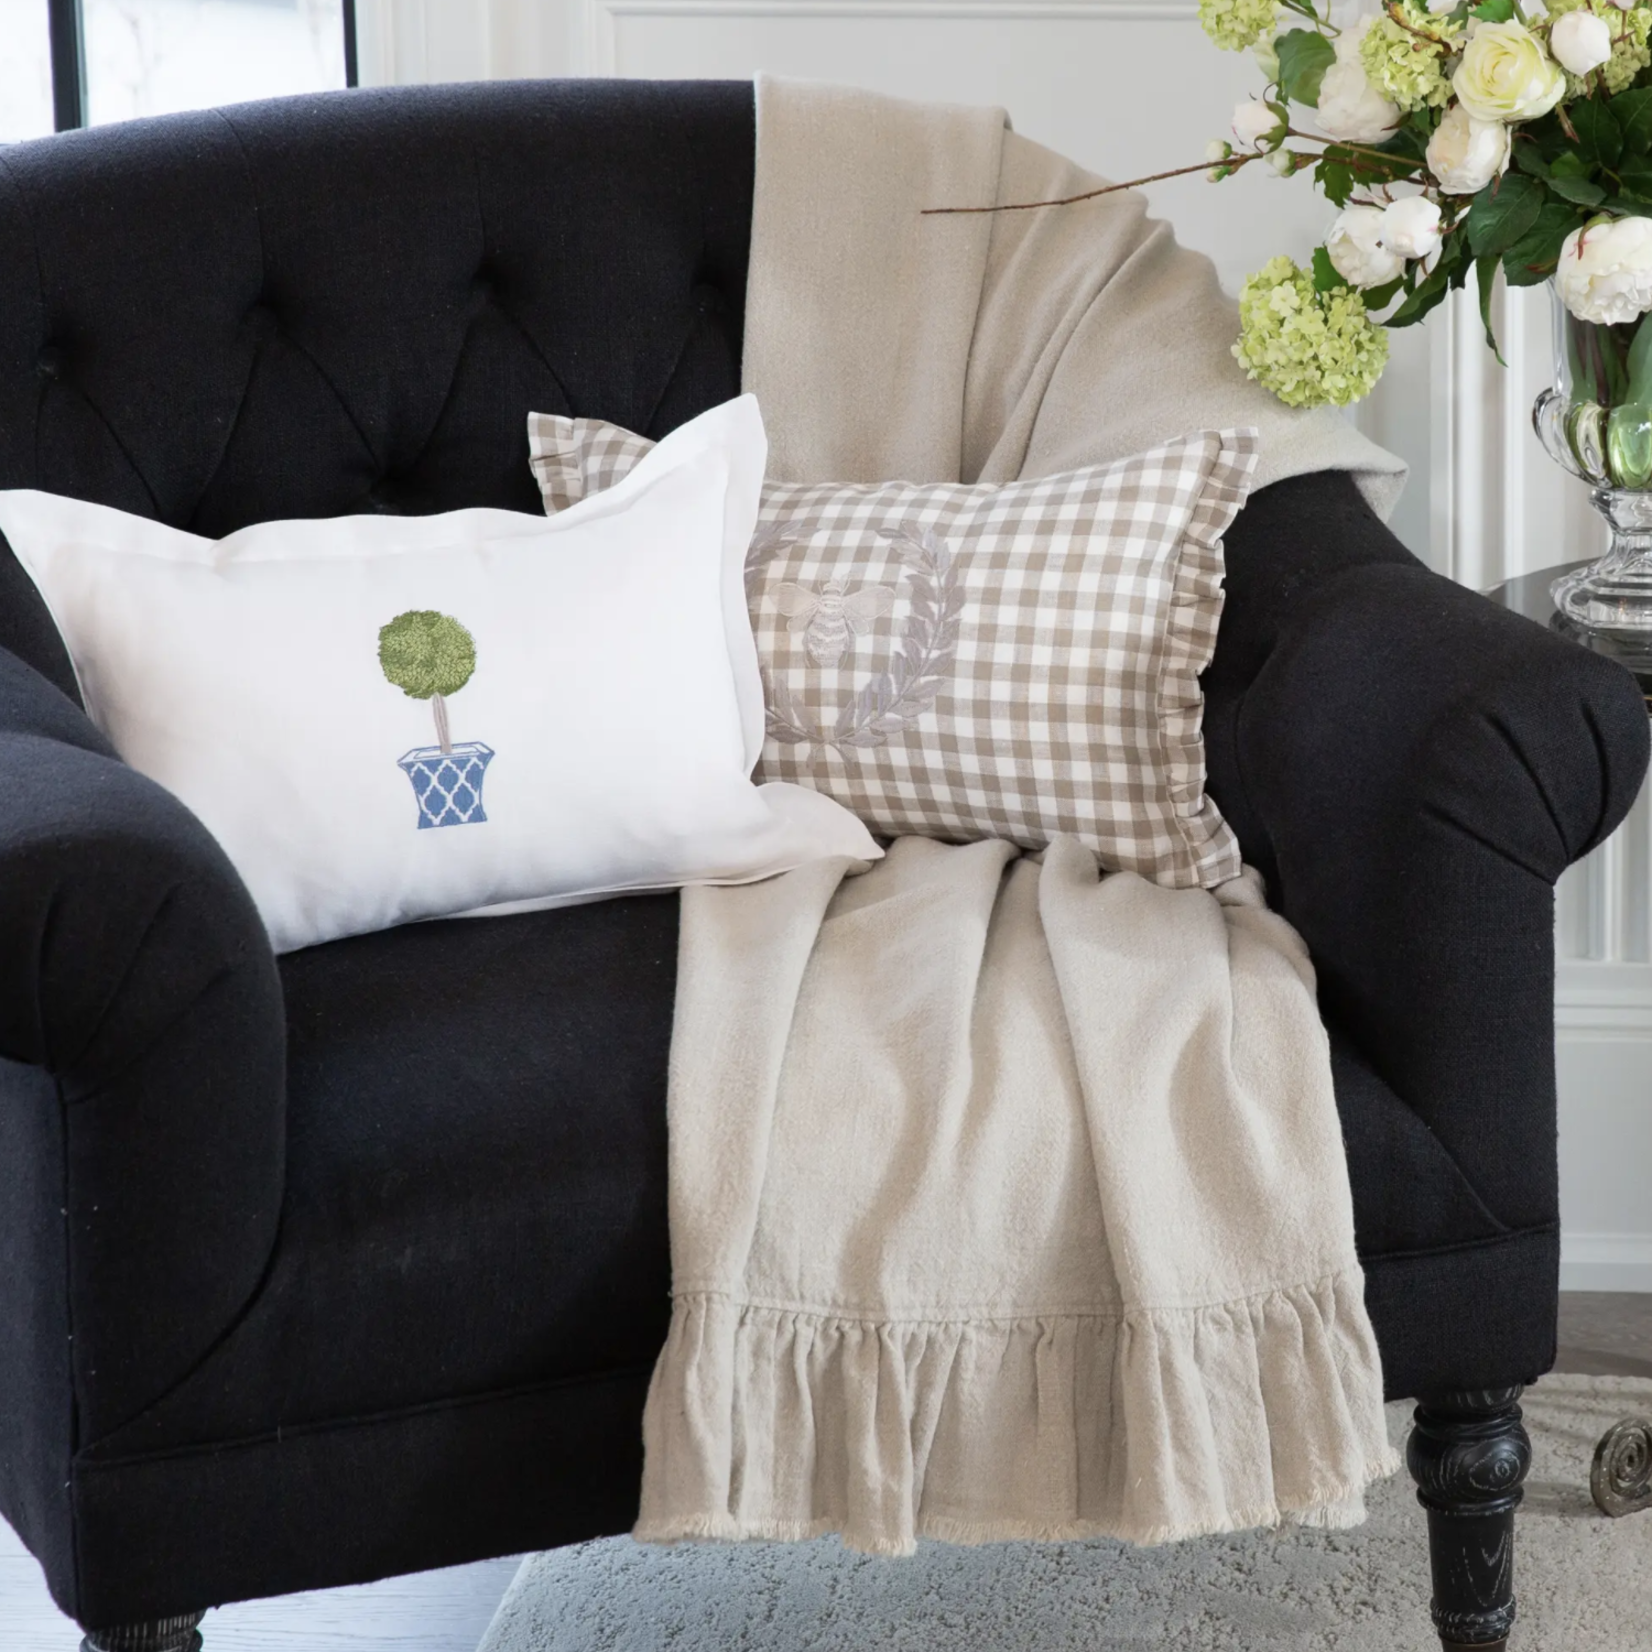 Crown Linen Designs Throw - Provence Natural Ruffle & Fringe